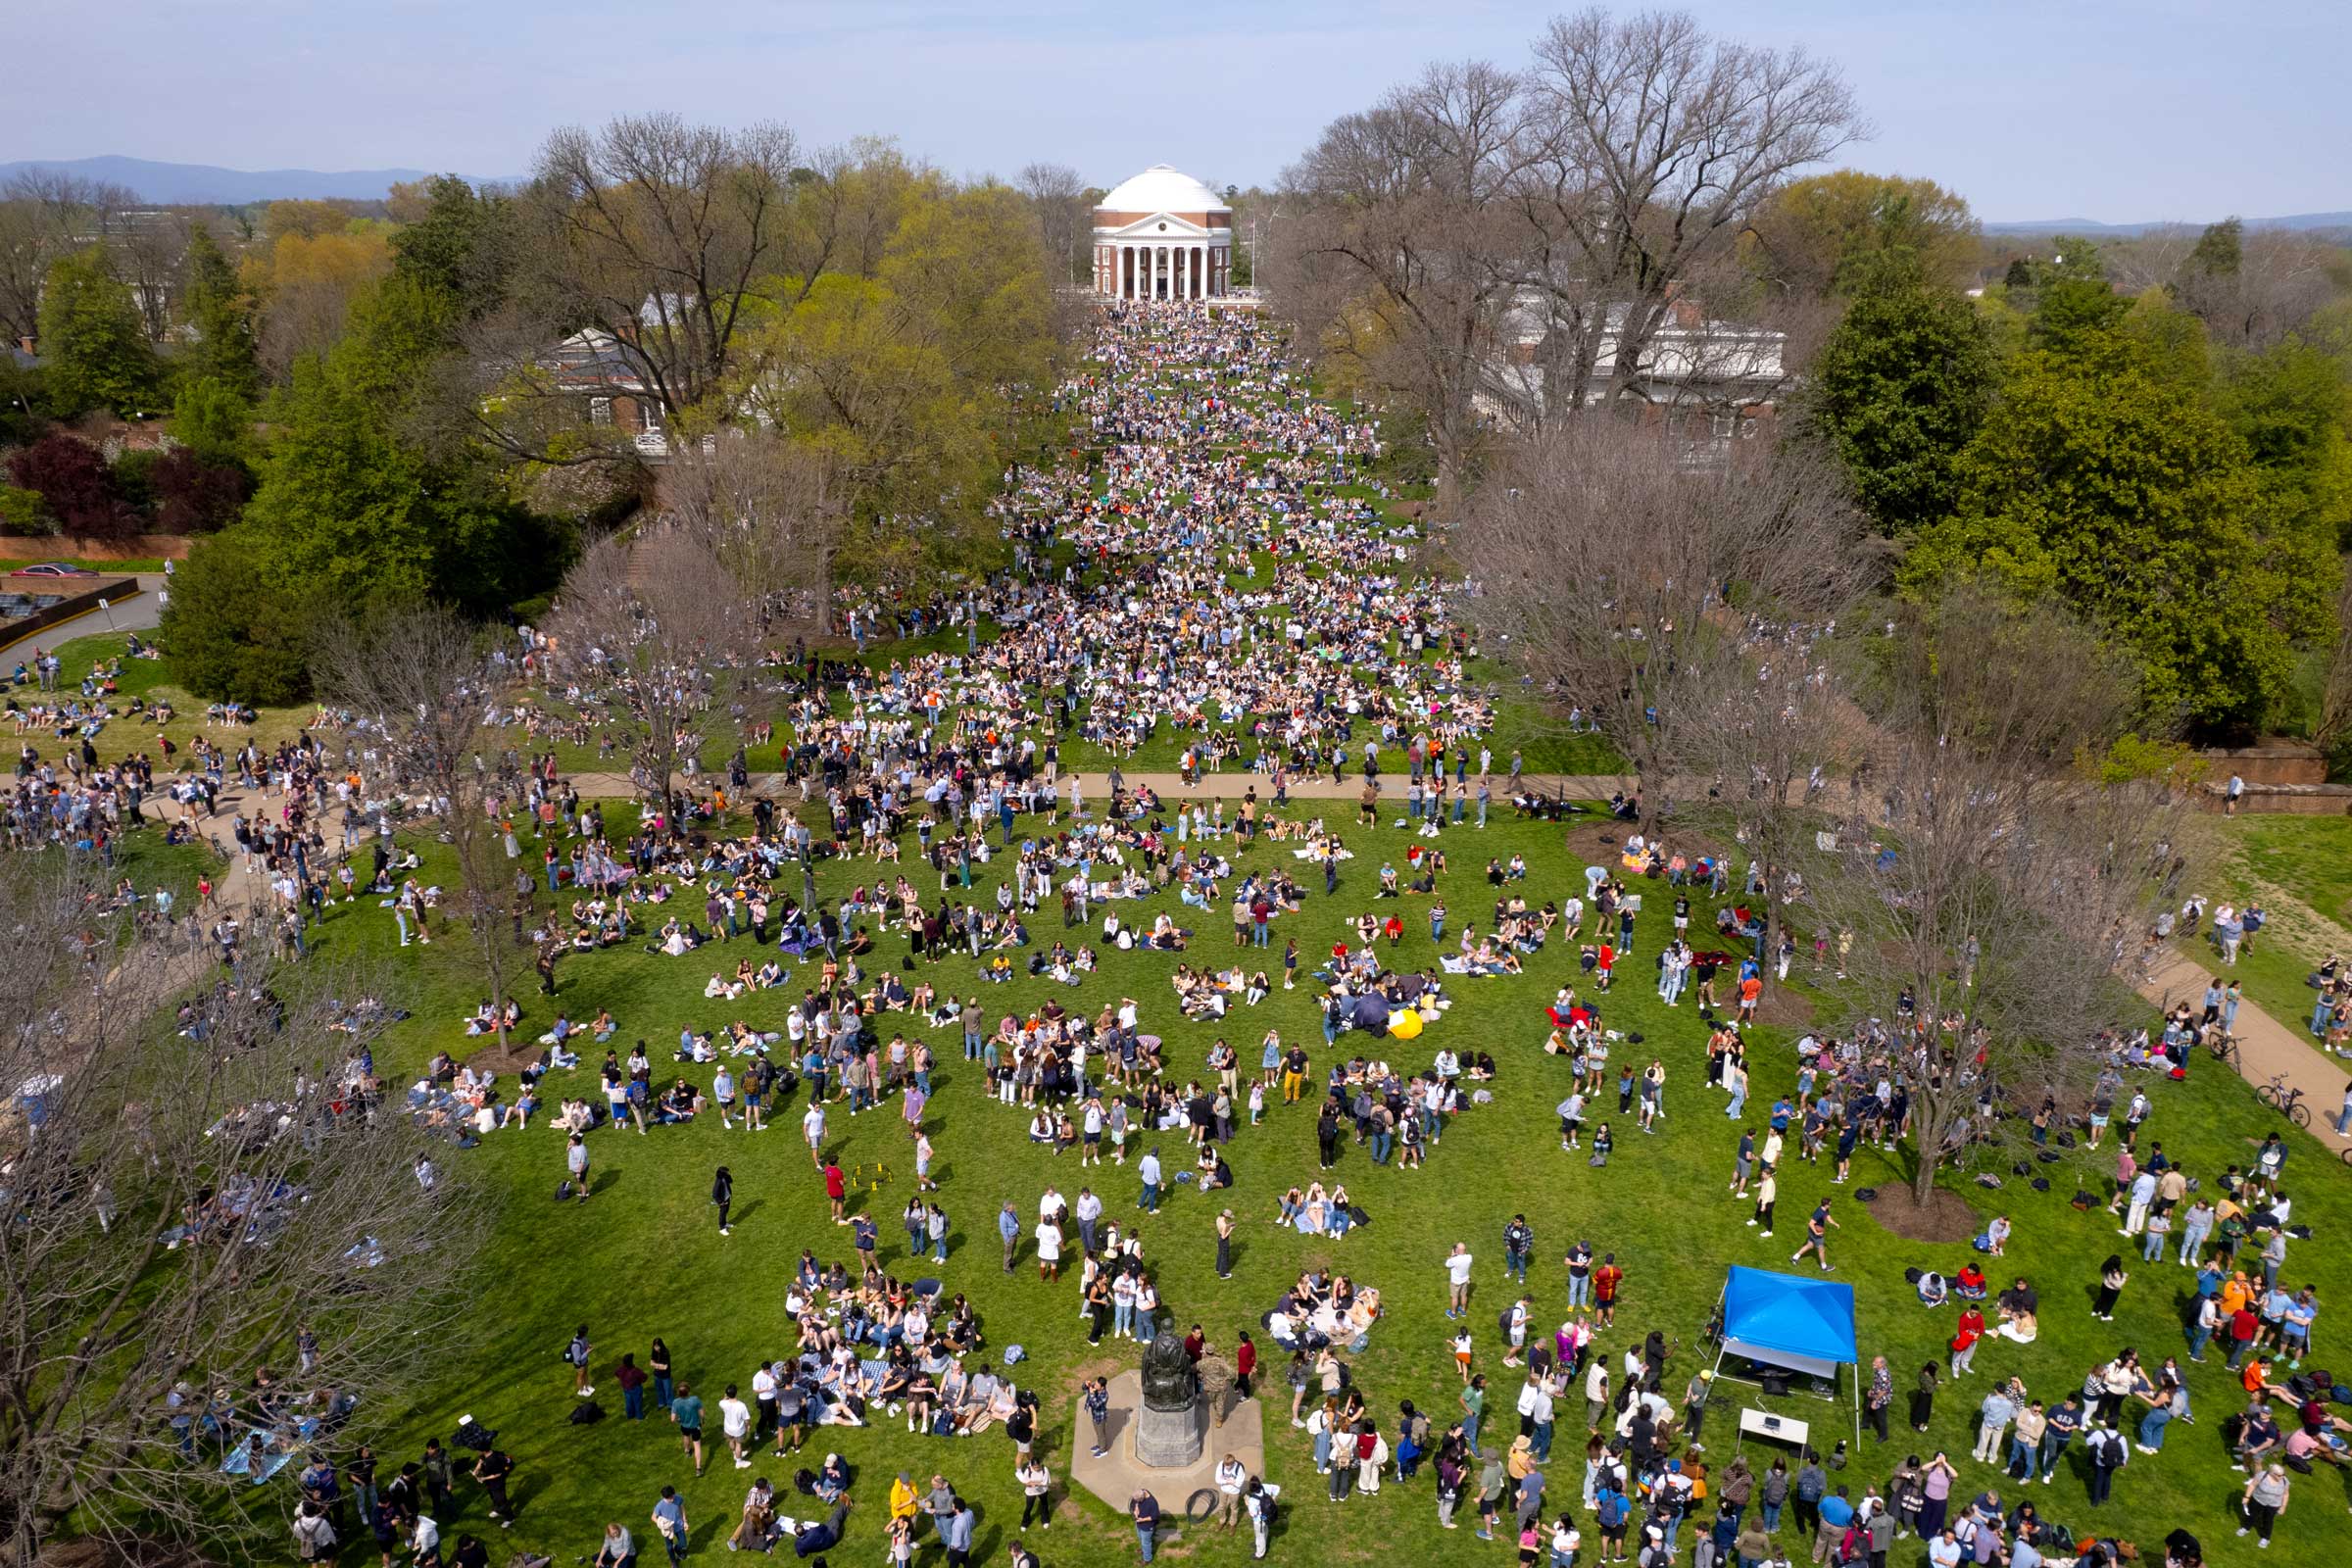 Drone aerial of the lawn full of community viewing the eclipse